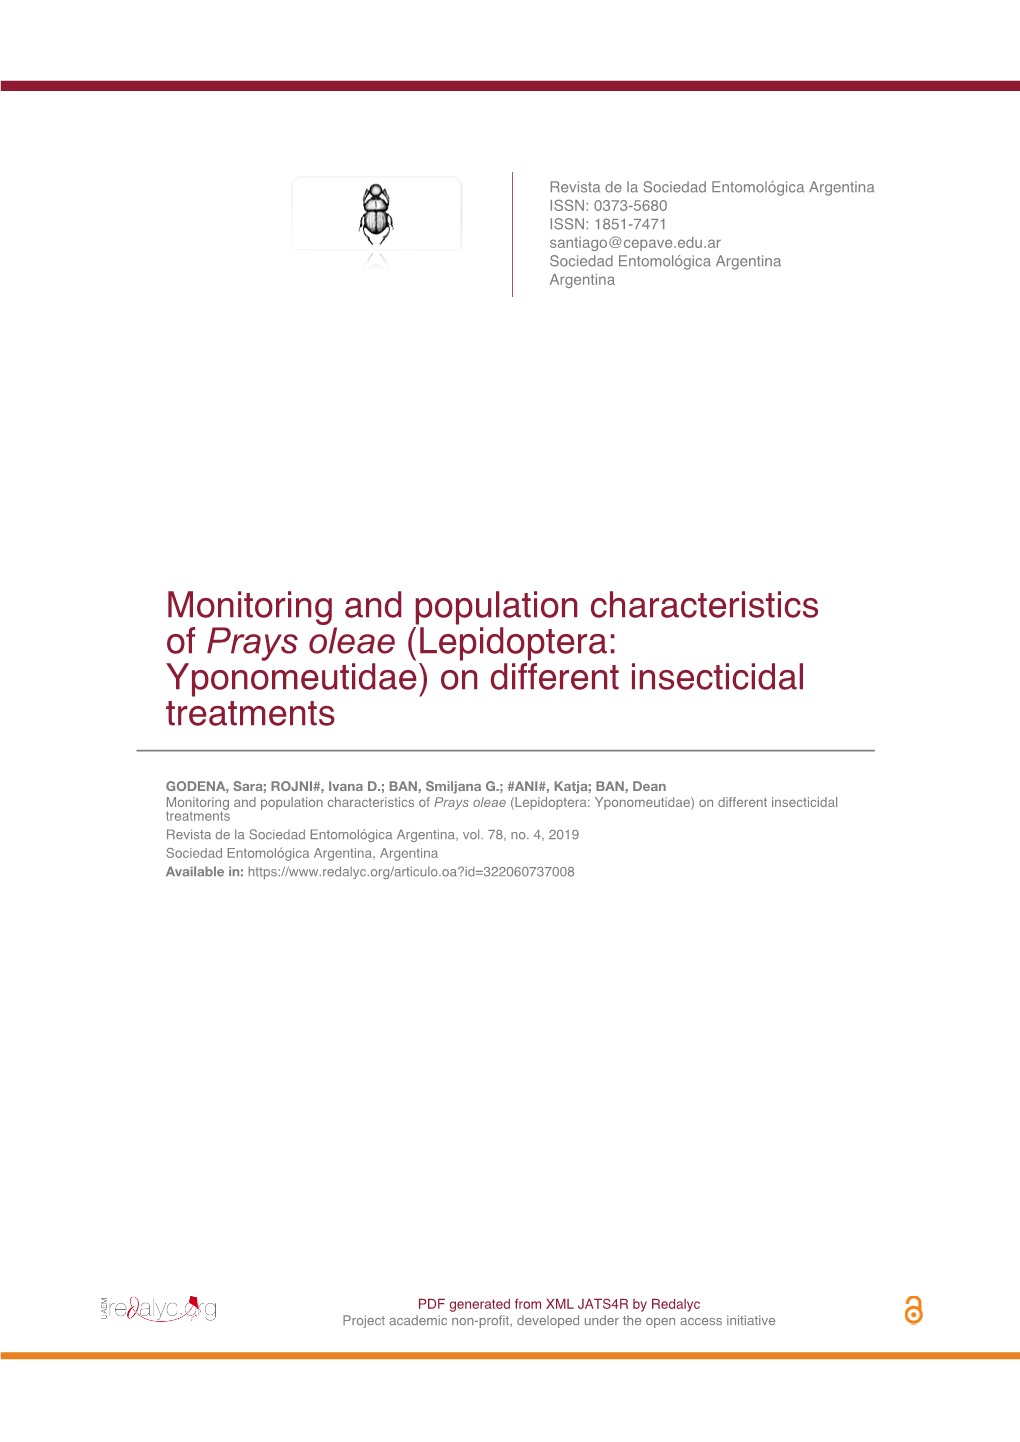 Monitoring and Population Characteristics of Prays Oleae (Lepidoptera: Yponomeutidae) on Different Insecticidal Treatments